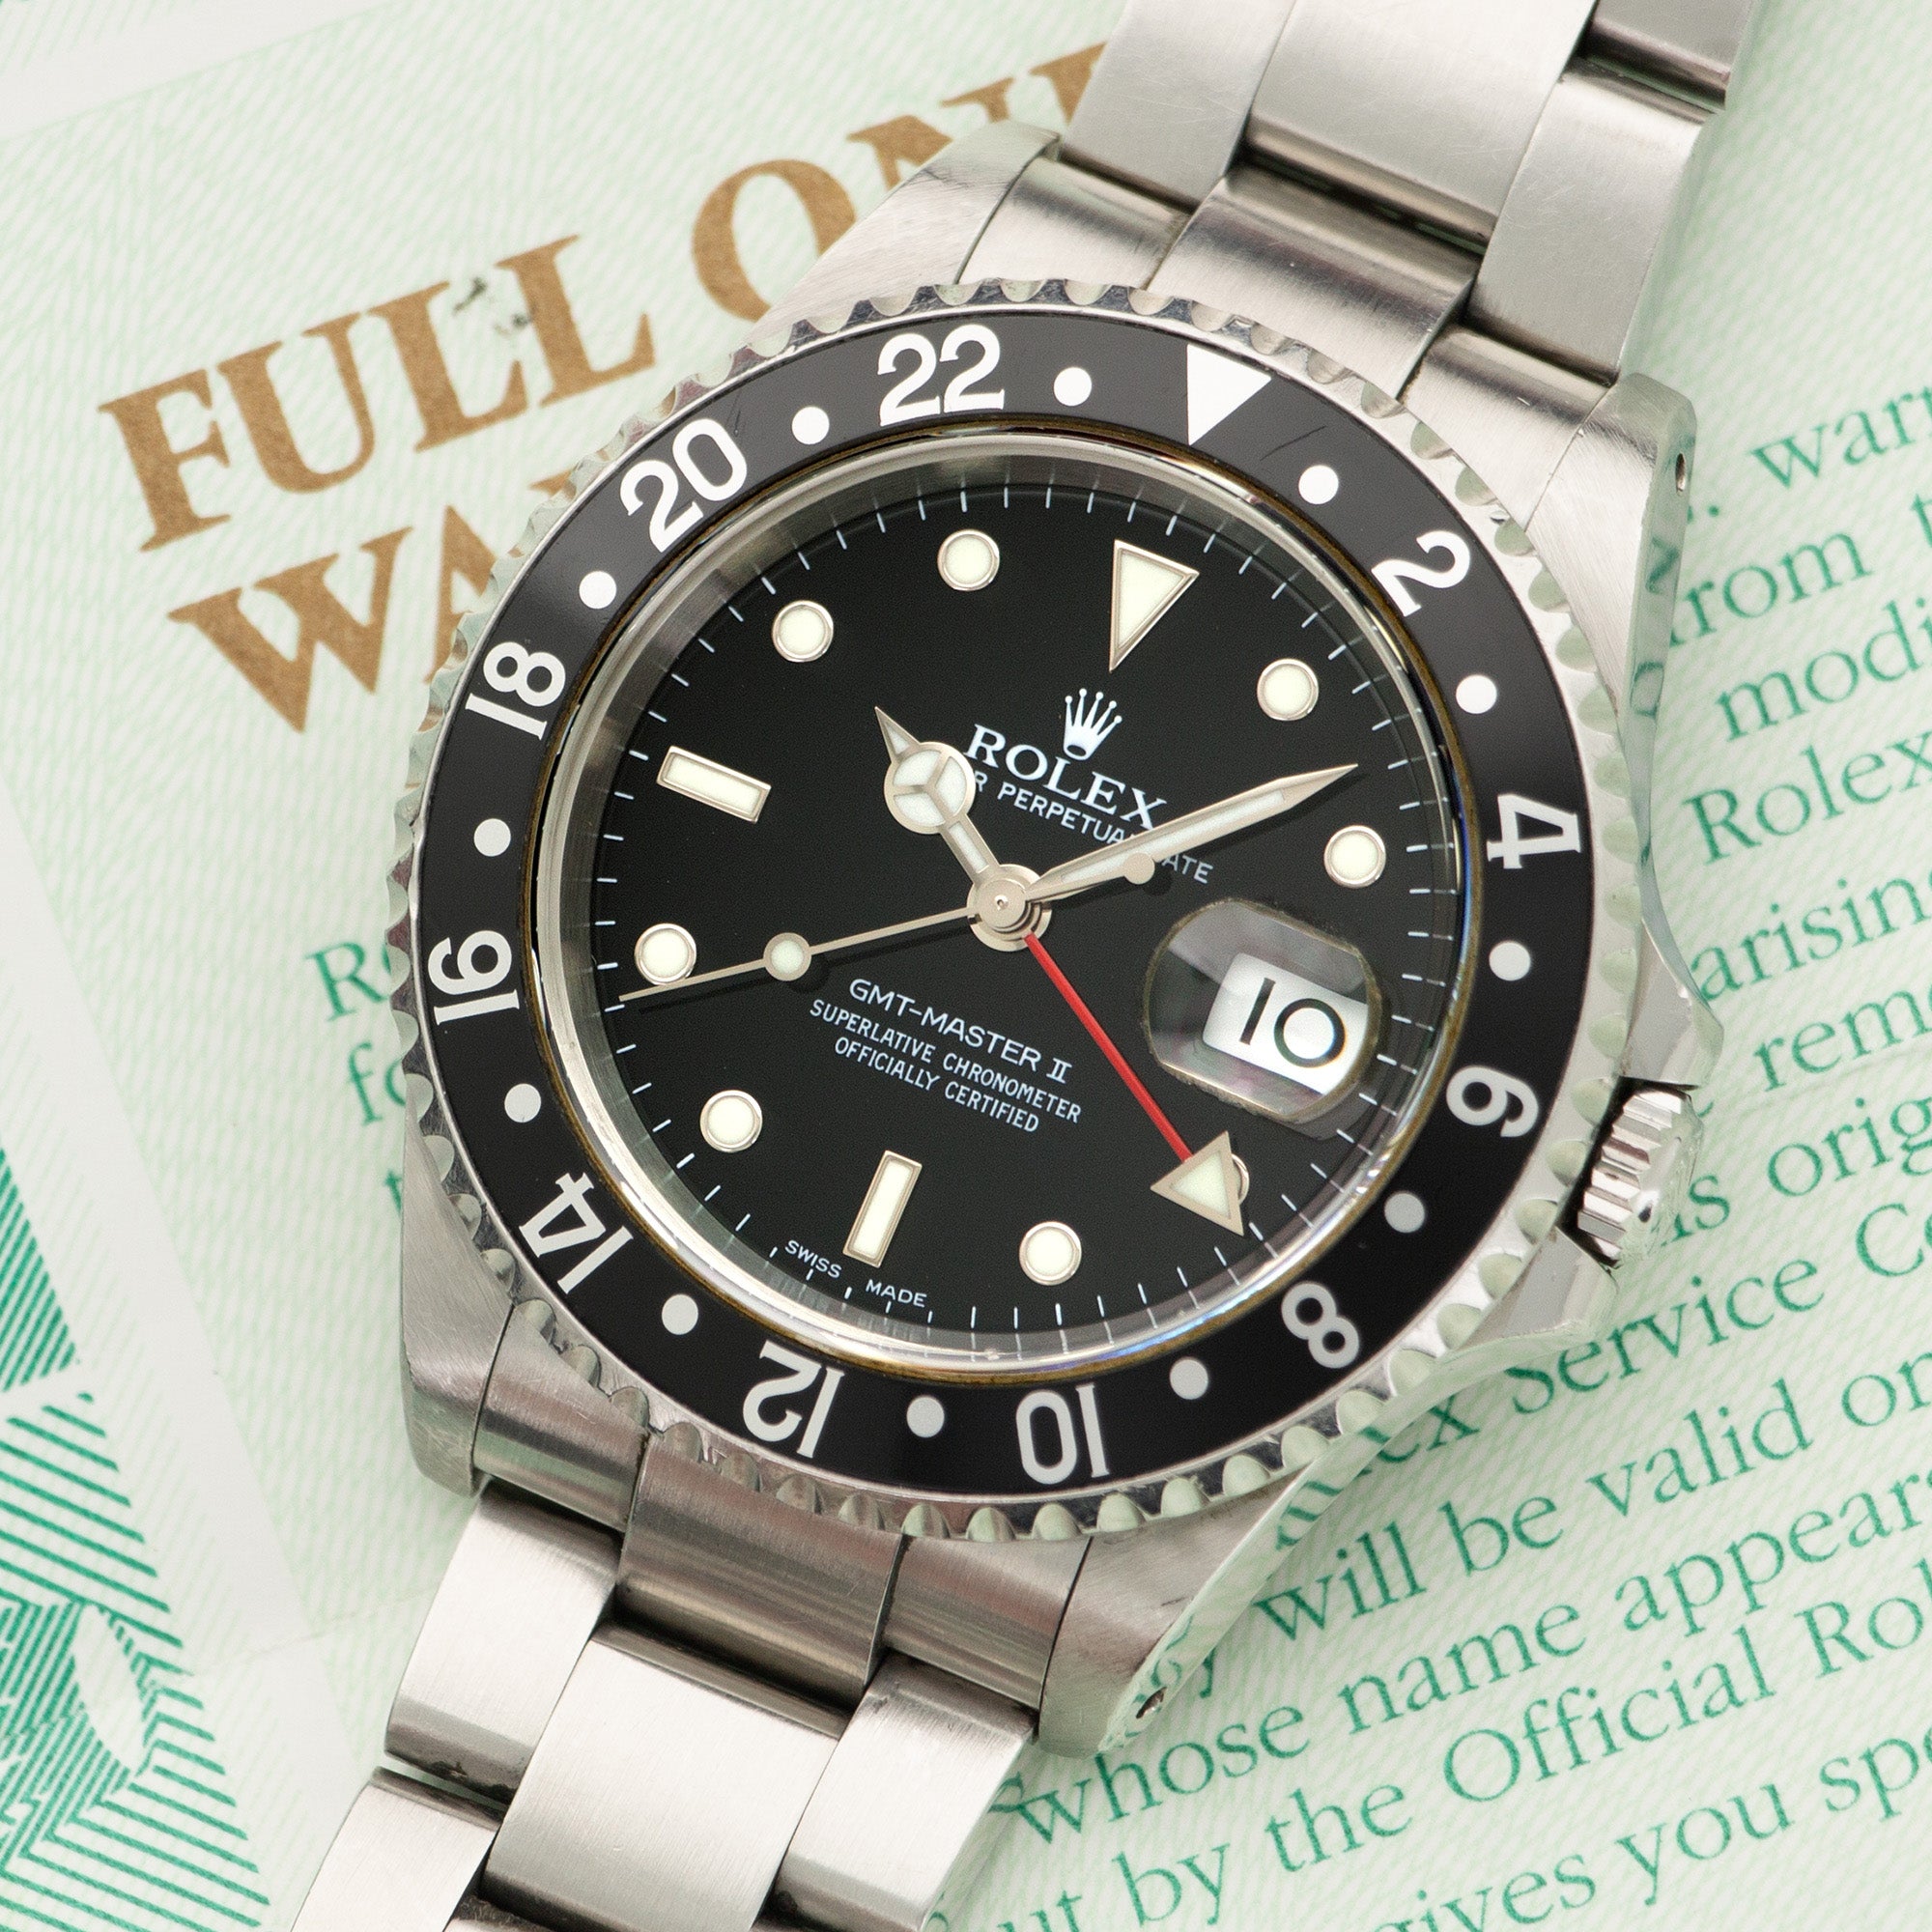 Rolex - Rolex GMT-Master II Watch Ref. 16710 with Original Papers - The Keystone Watches